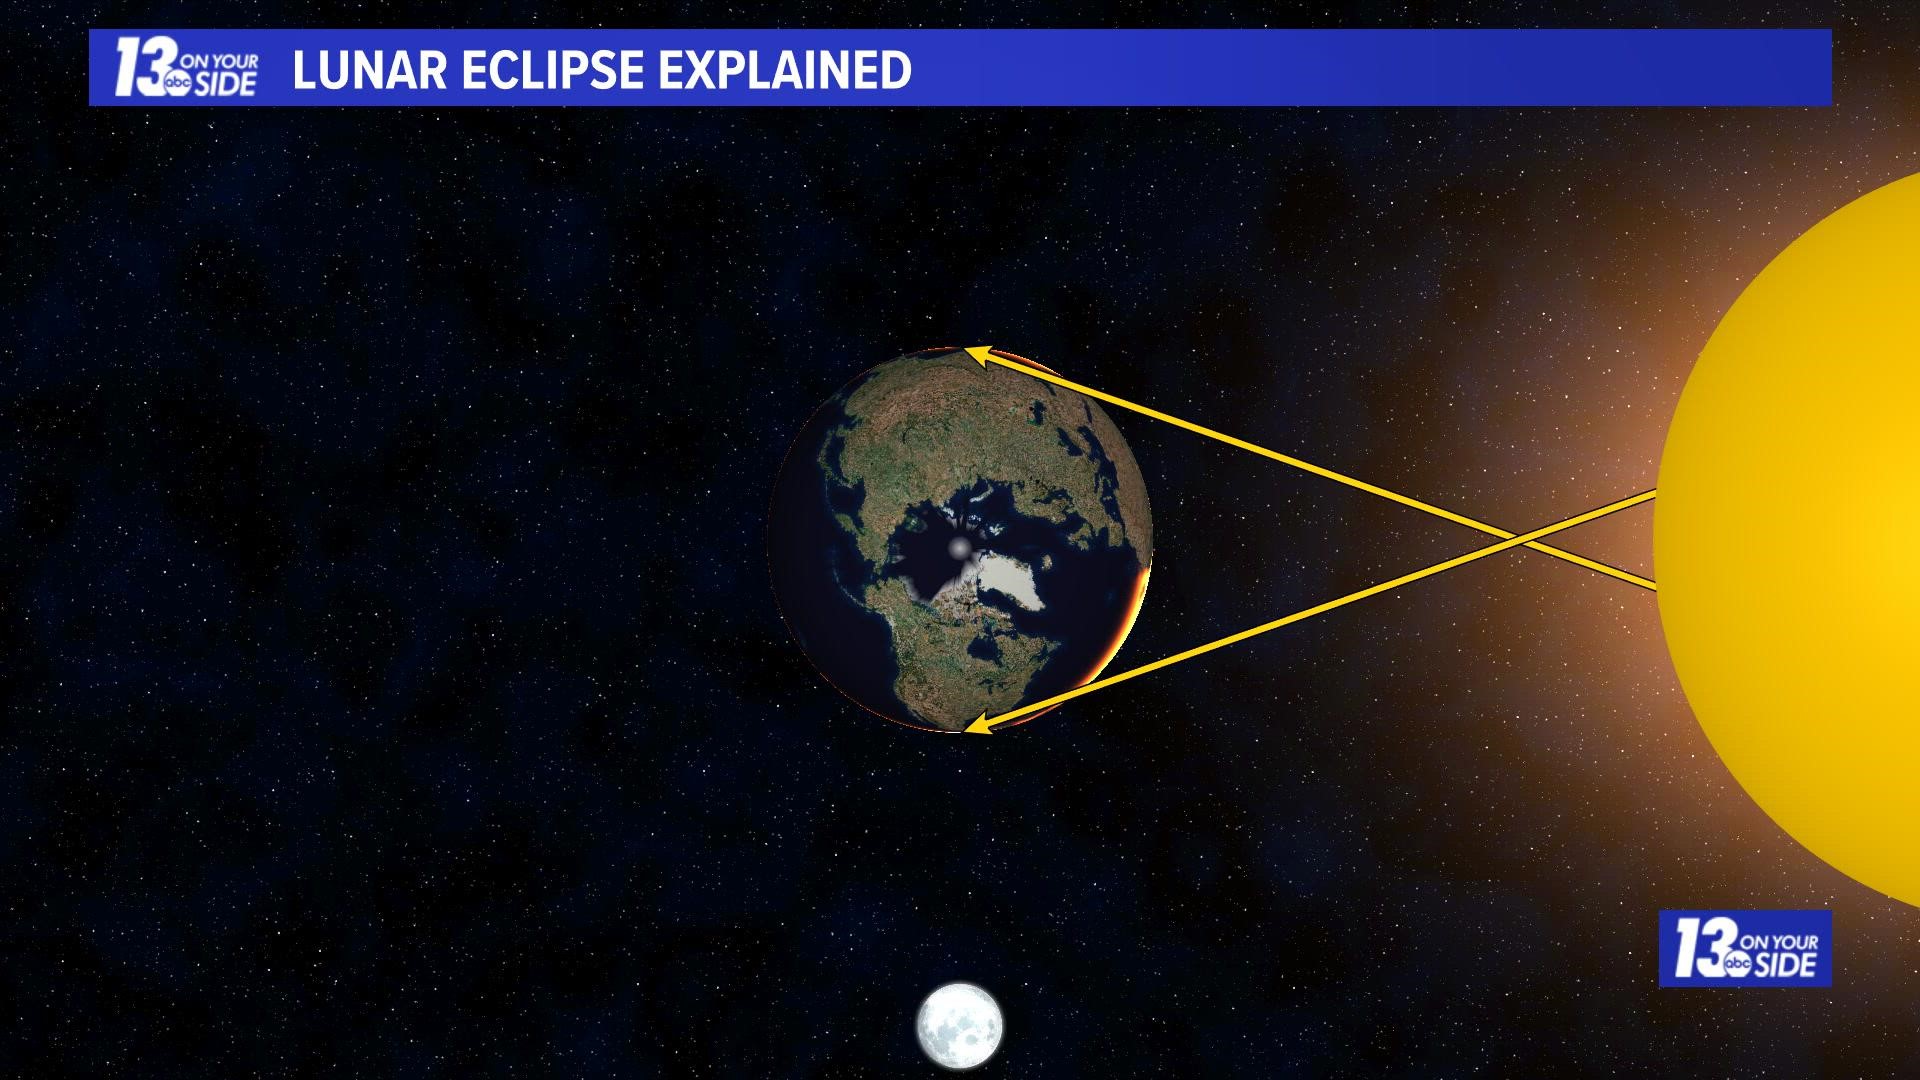 Here's how a lunar eclipse occurs.